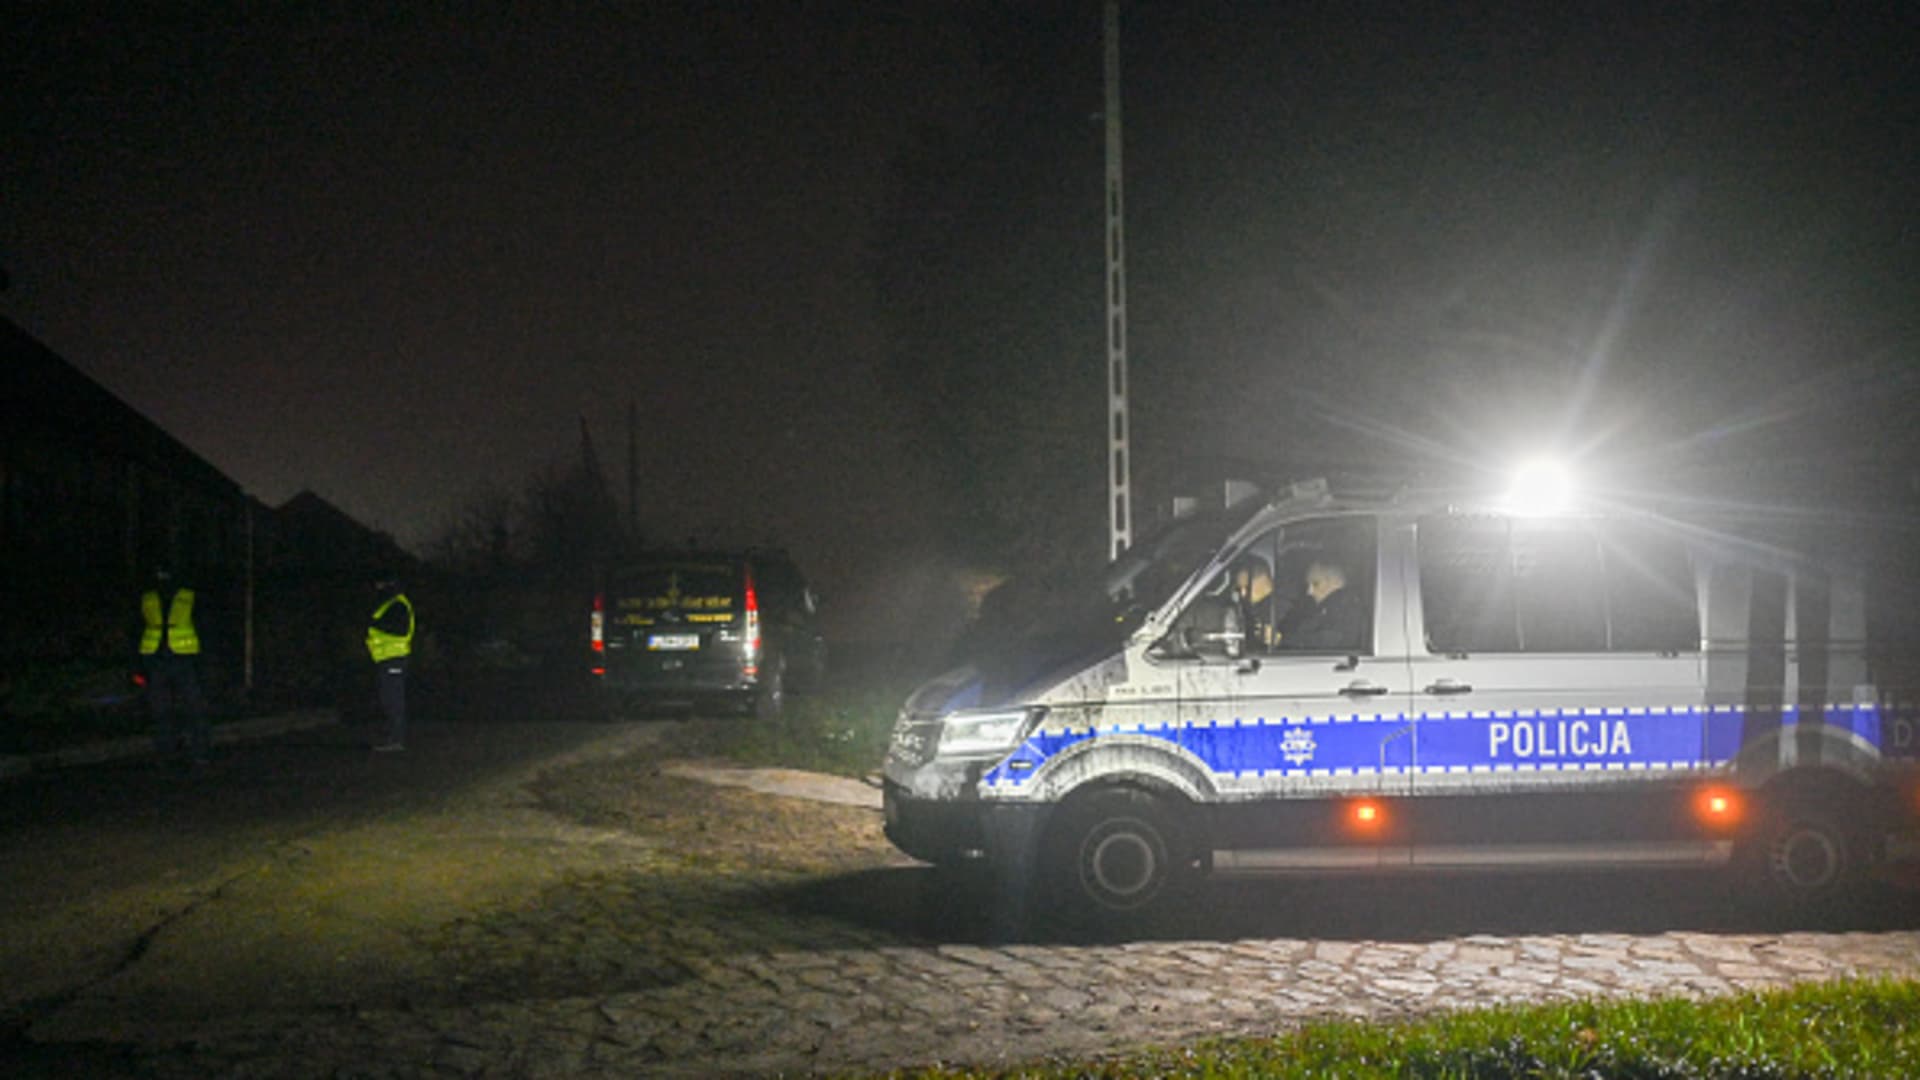 Police run a check point outside the scene in Przewodow, Poland, where authorities in Warsaw say a Russian-made missile struck its territory, killing two civilians.